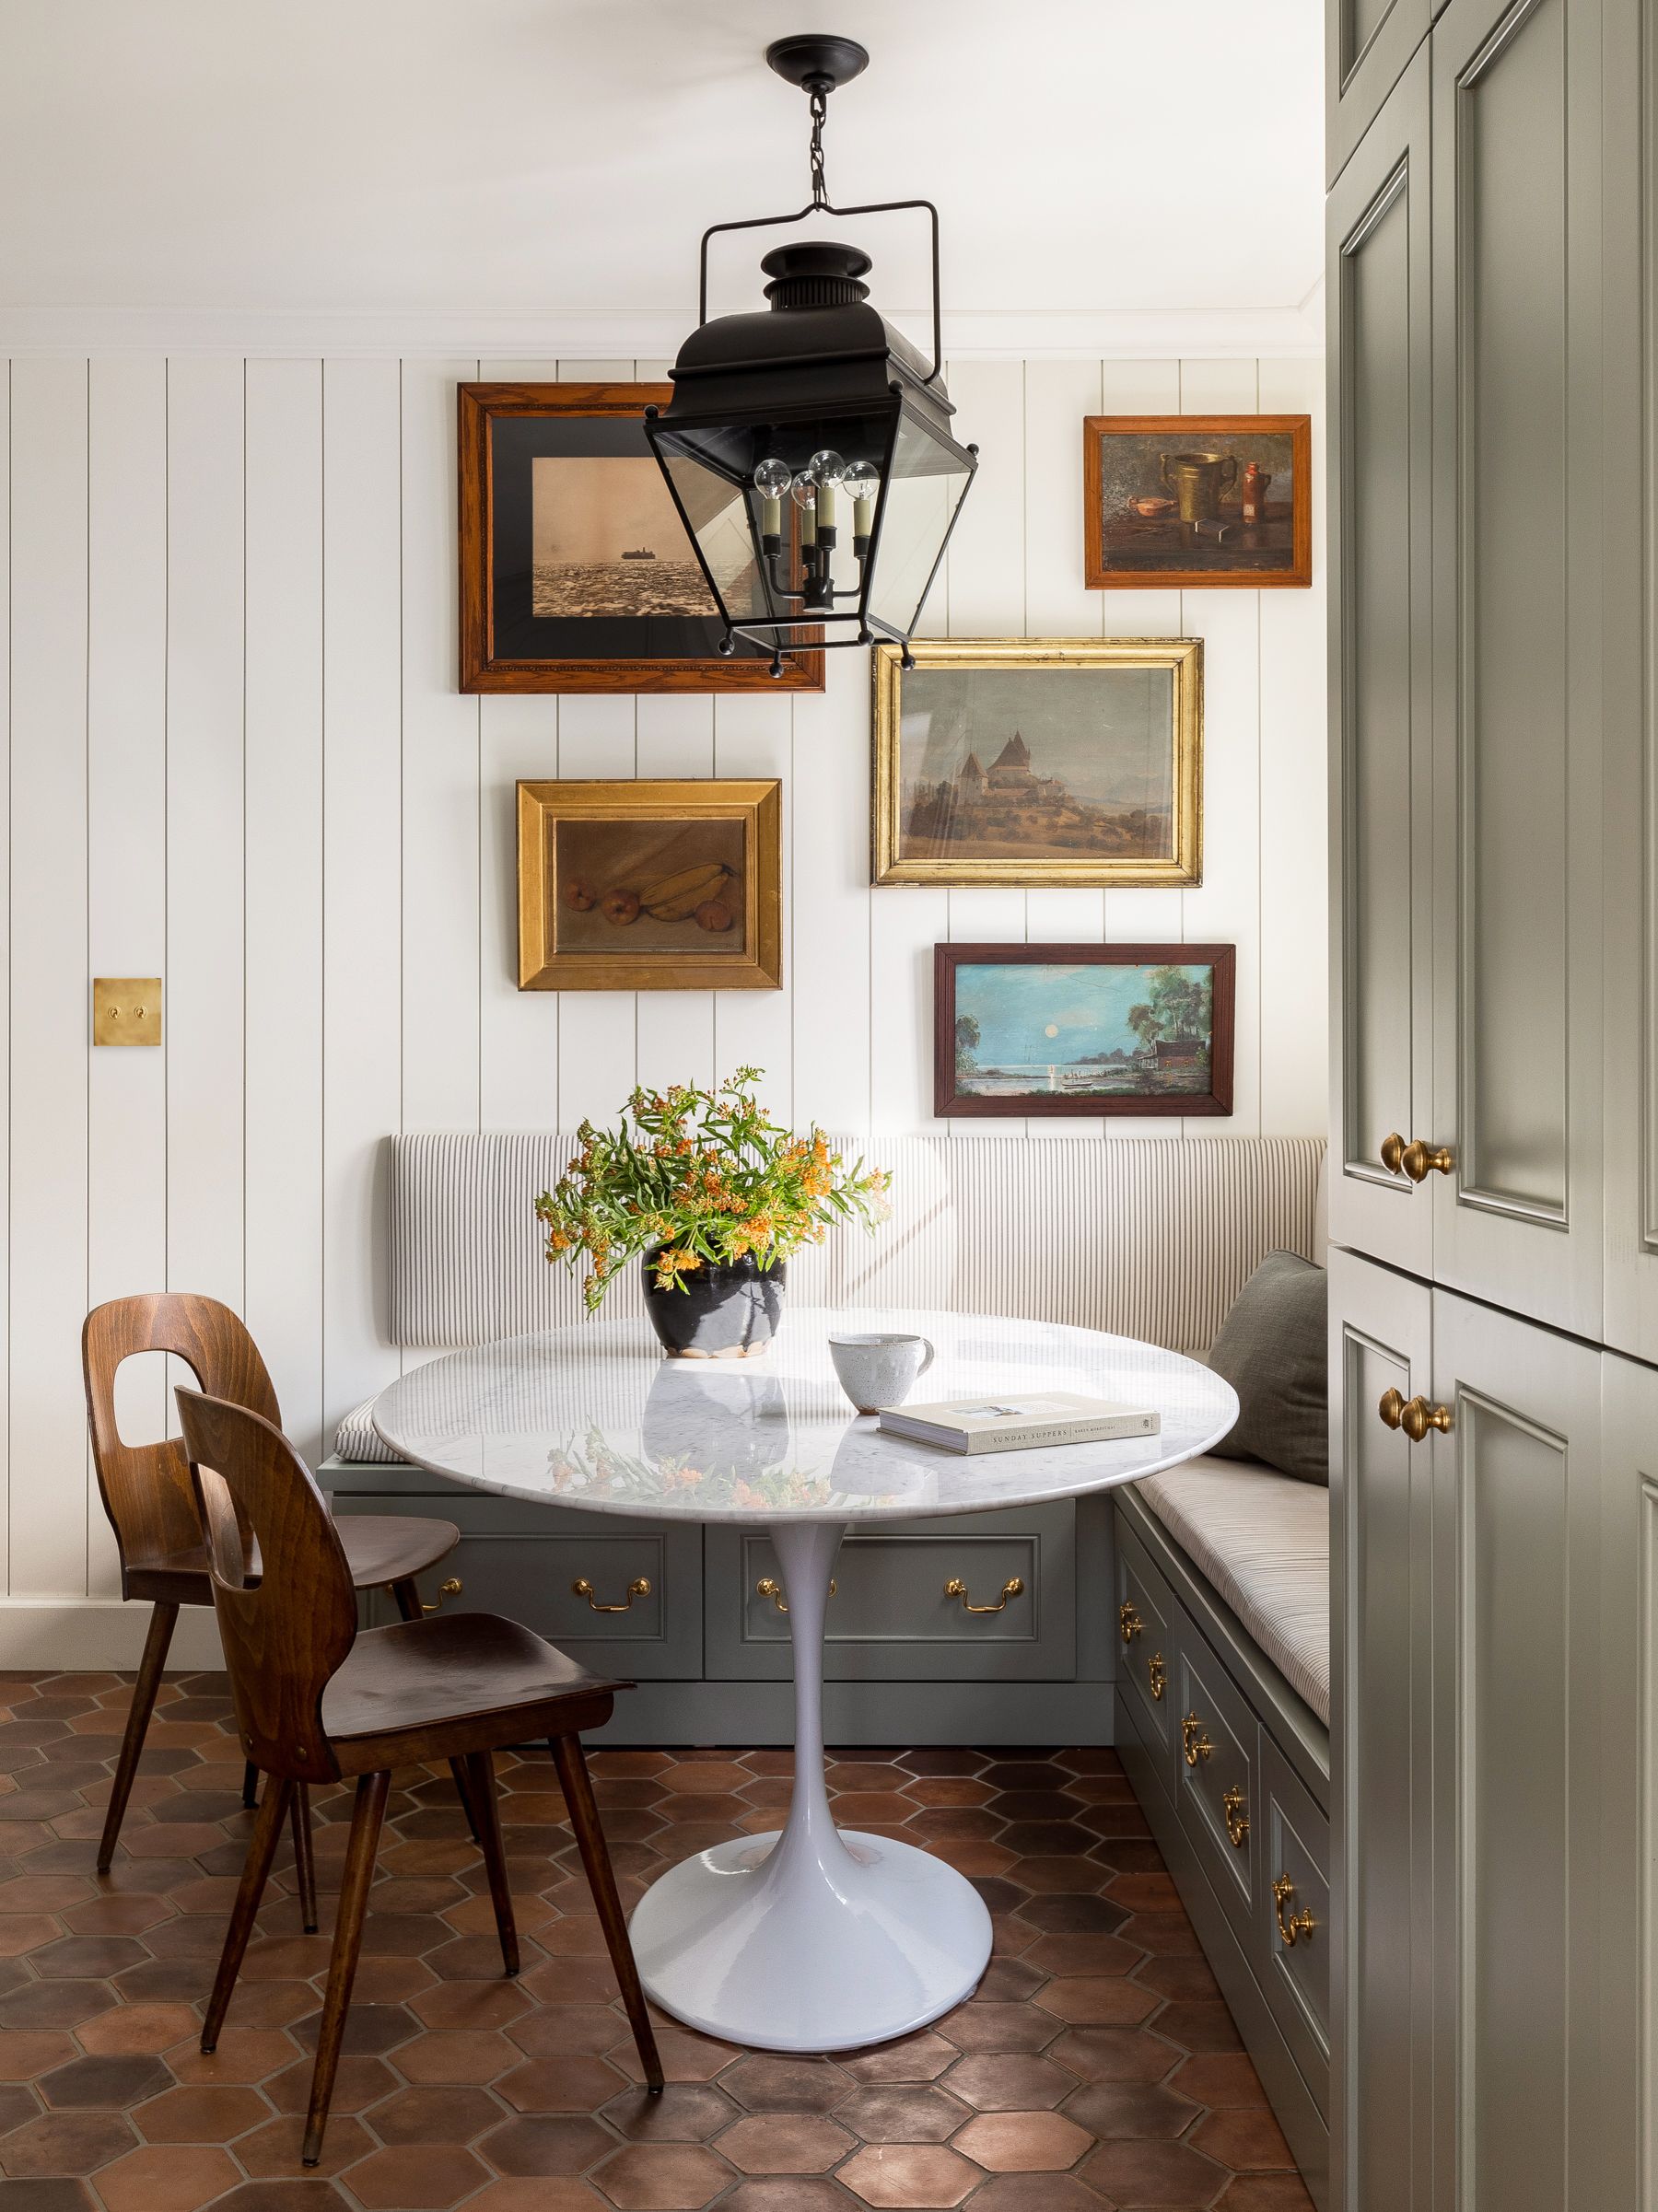 Dining Room Table Breakfast Nook Outlet, 18 OFF   www ...